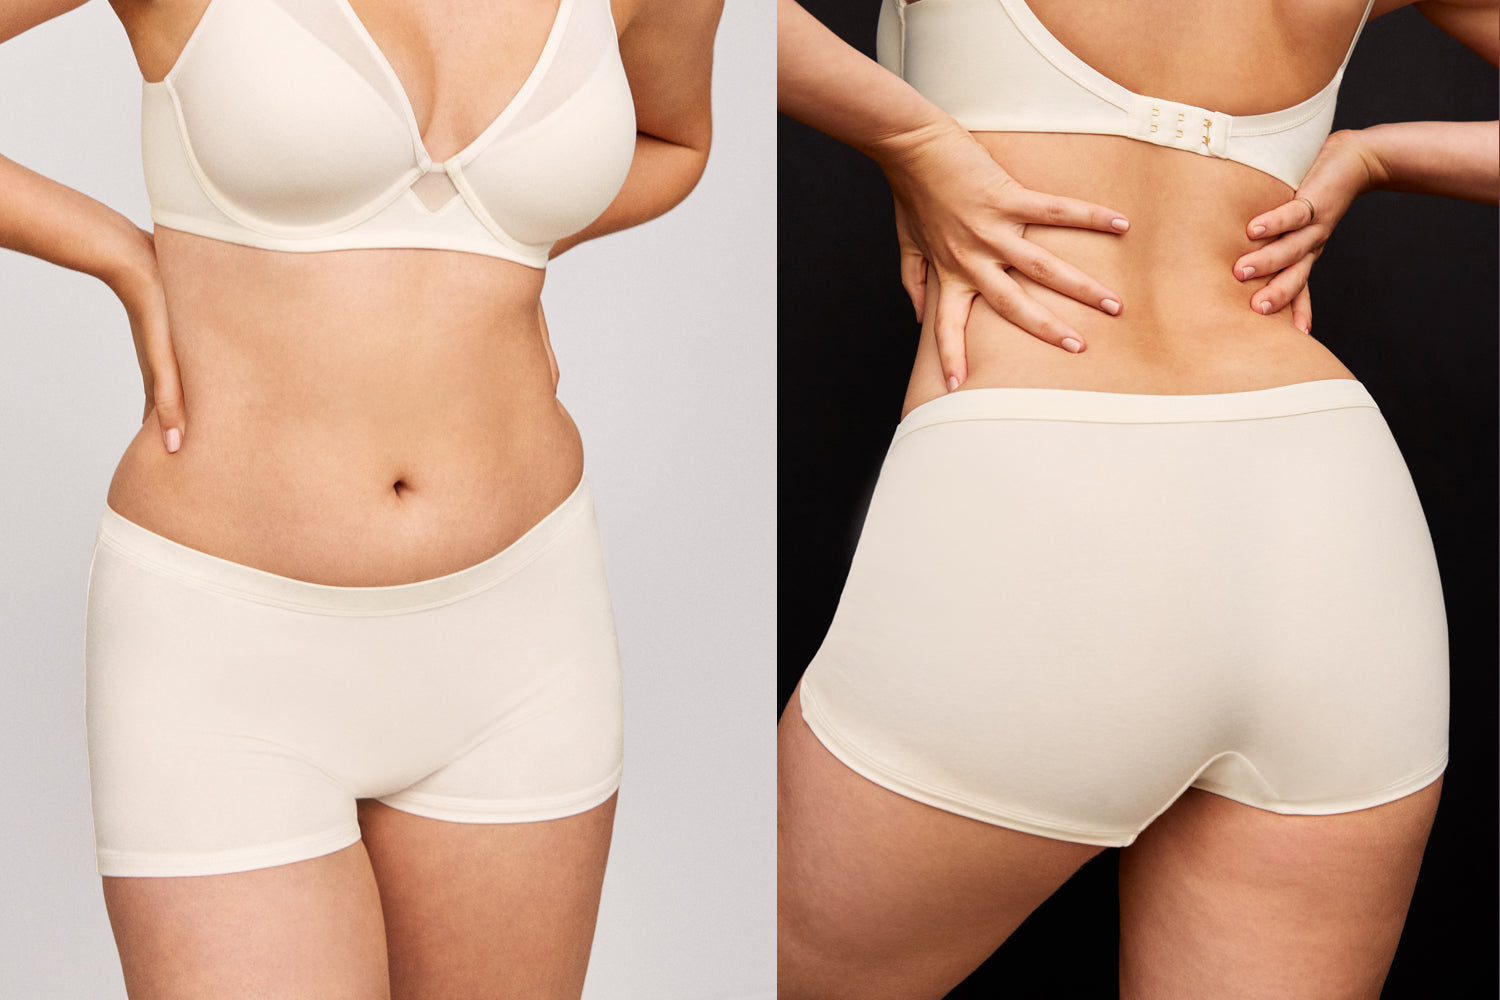 How to Choose the Right Undergarment for Your Outfit - NNPN